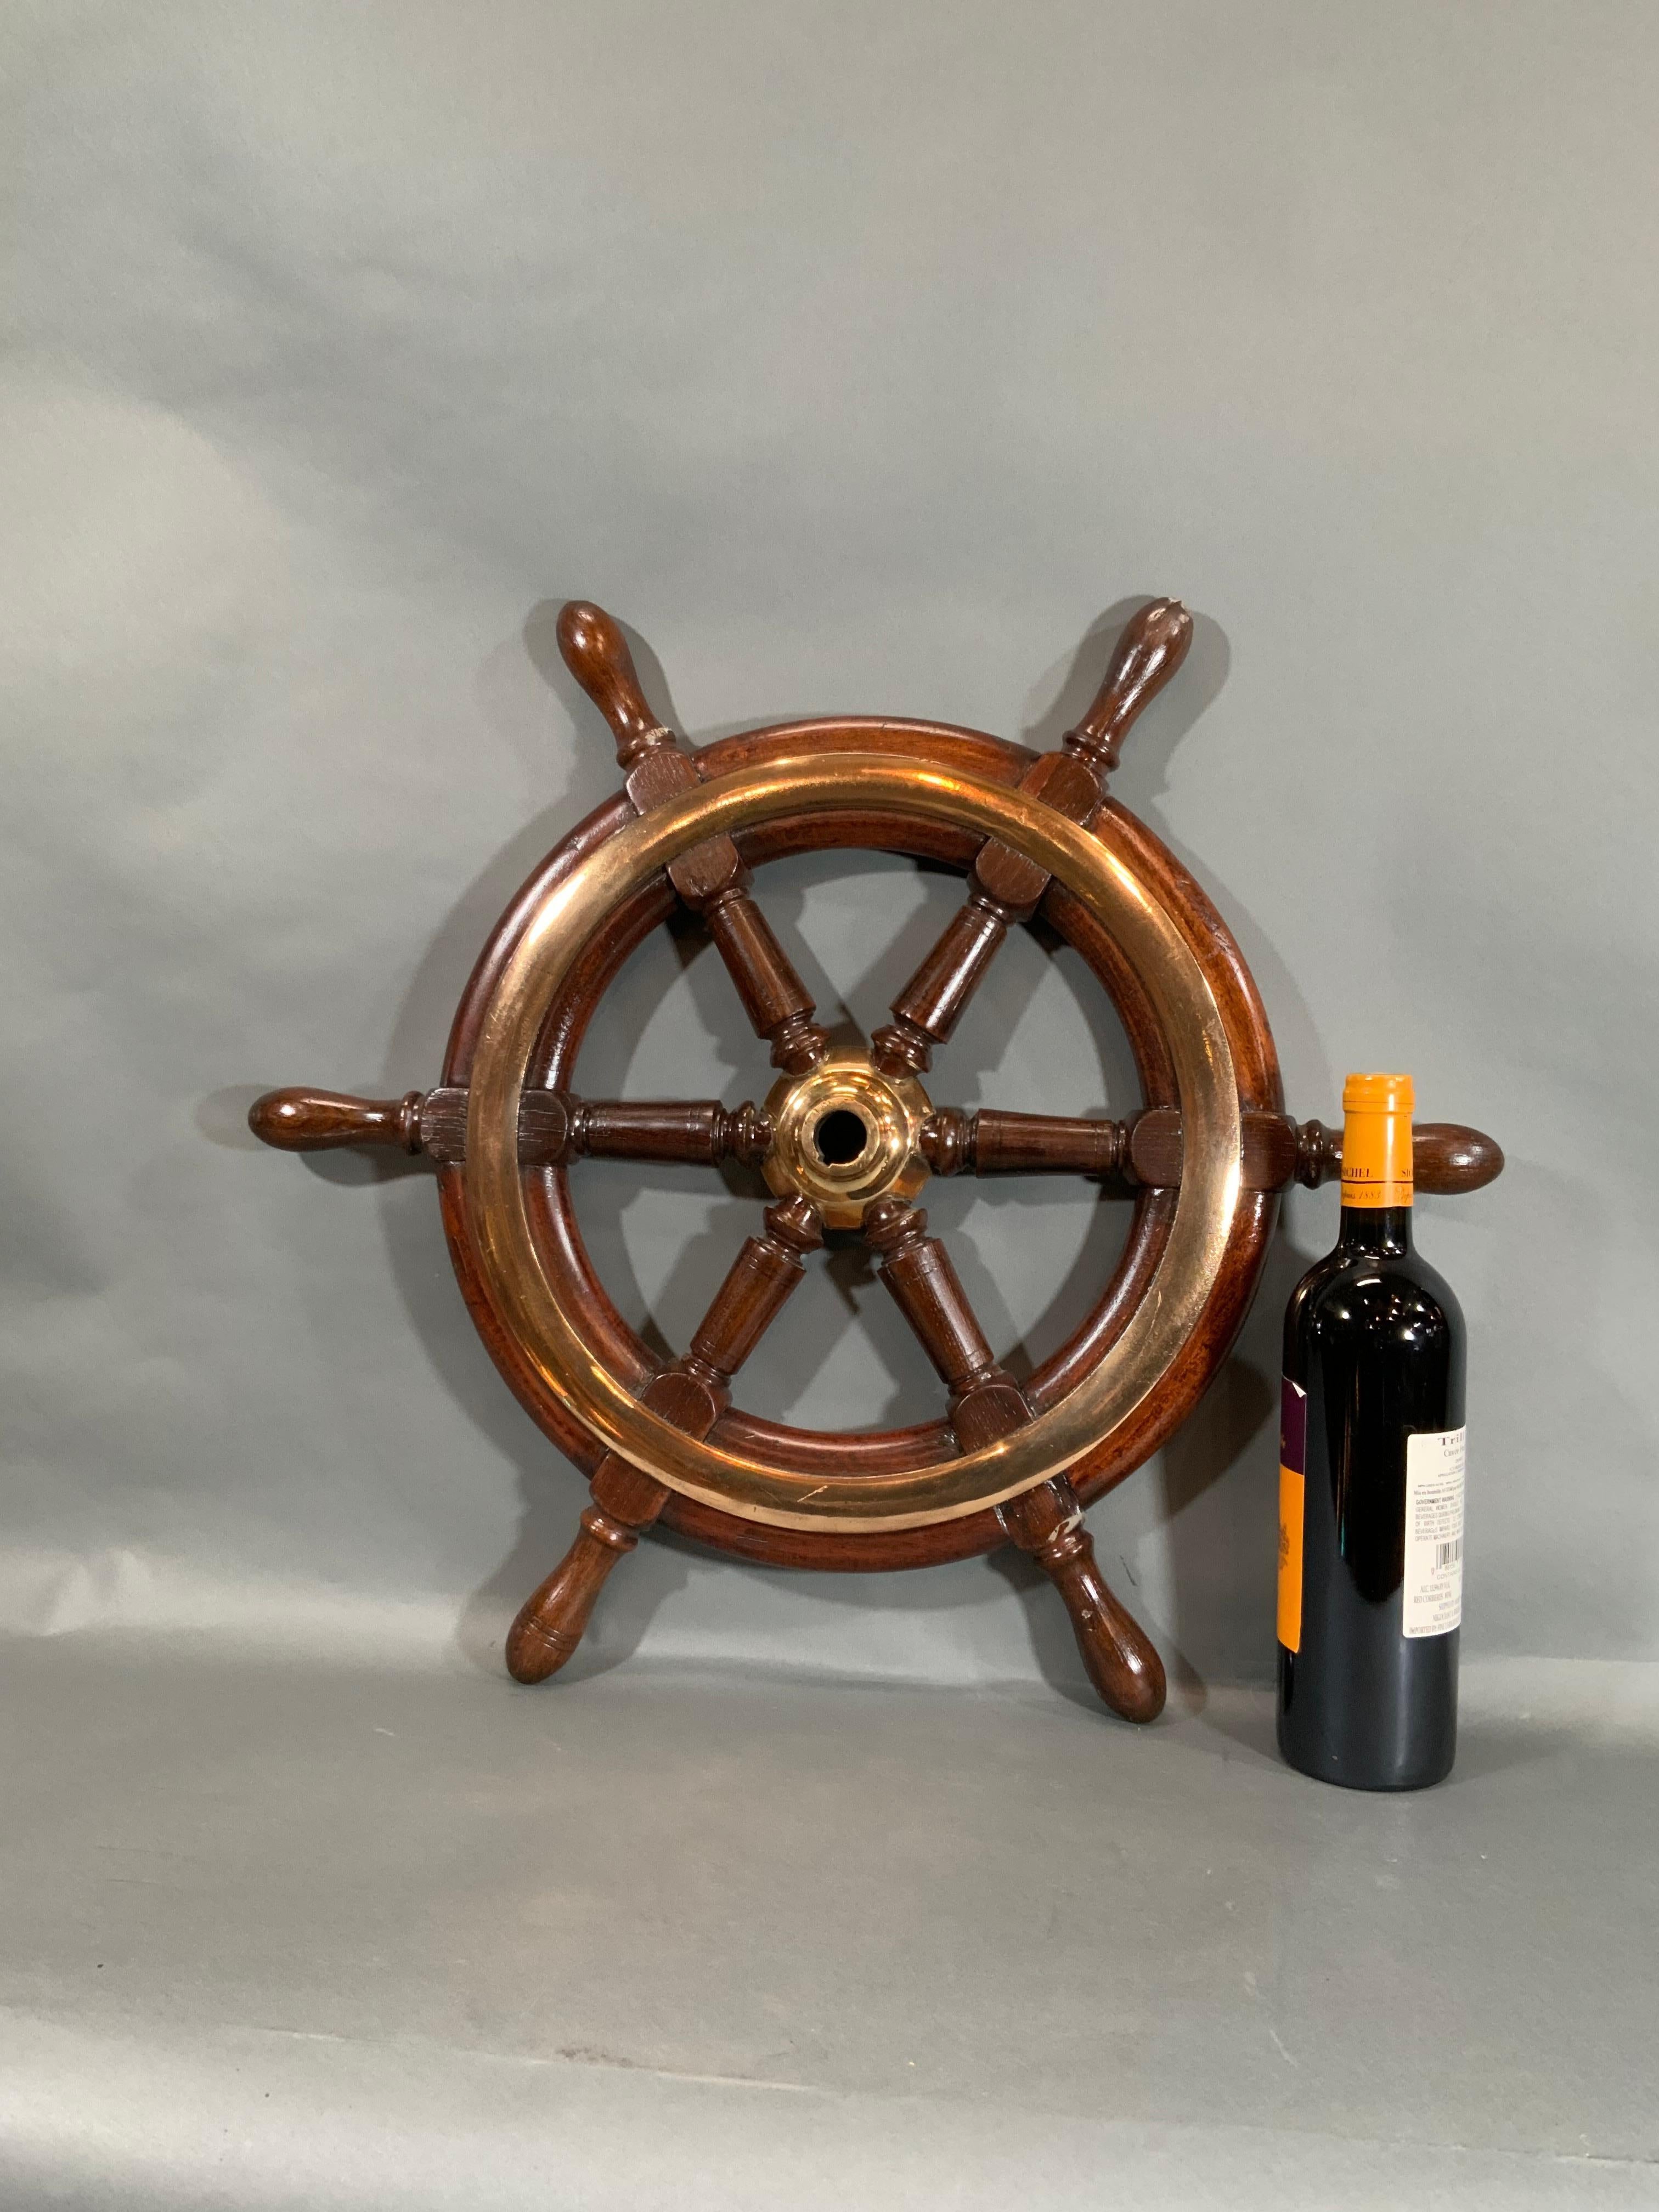 Antique boat wheel from a yacht circa 1890. With highly polished brasses, six turned spokes, the outer ring is heavy brass. This is an exceptional helm.

Overall dimensions: Weight is 12 pounds. 24